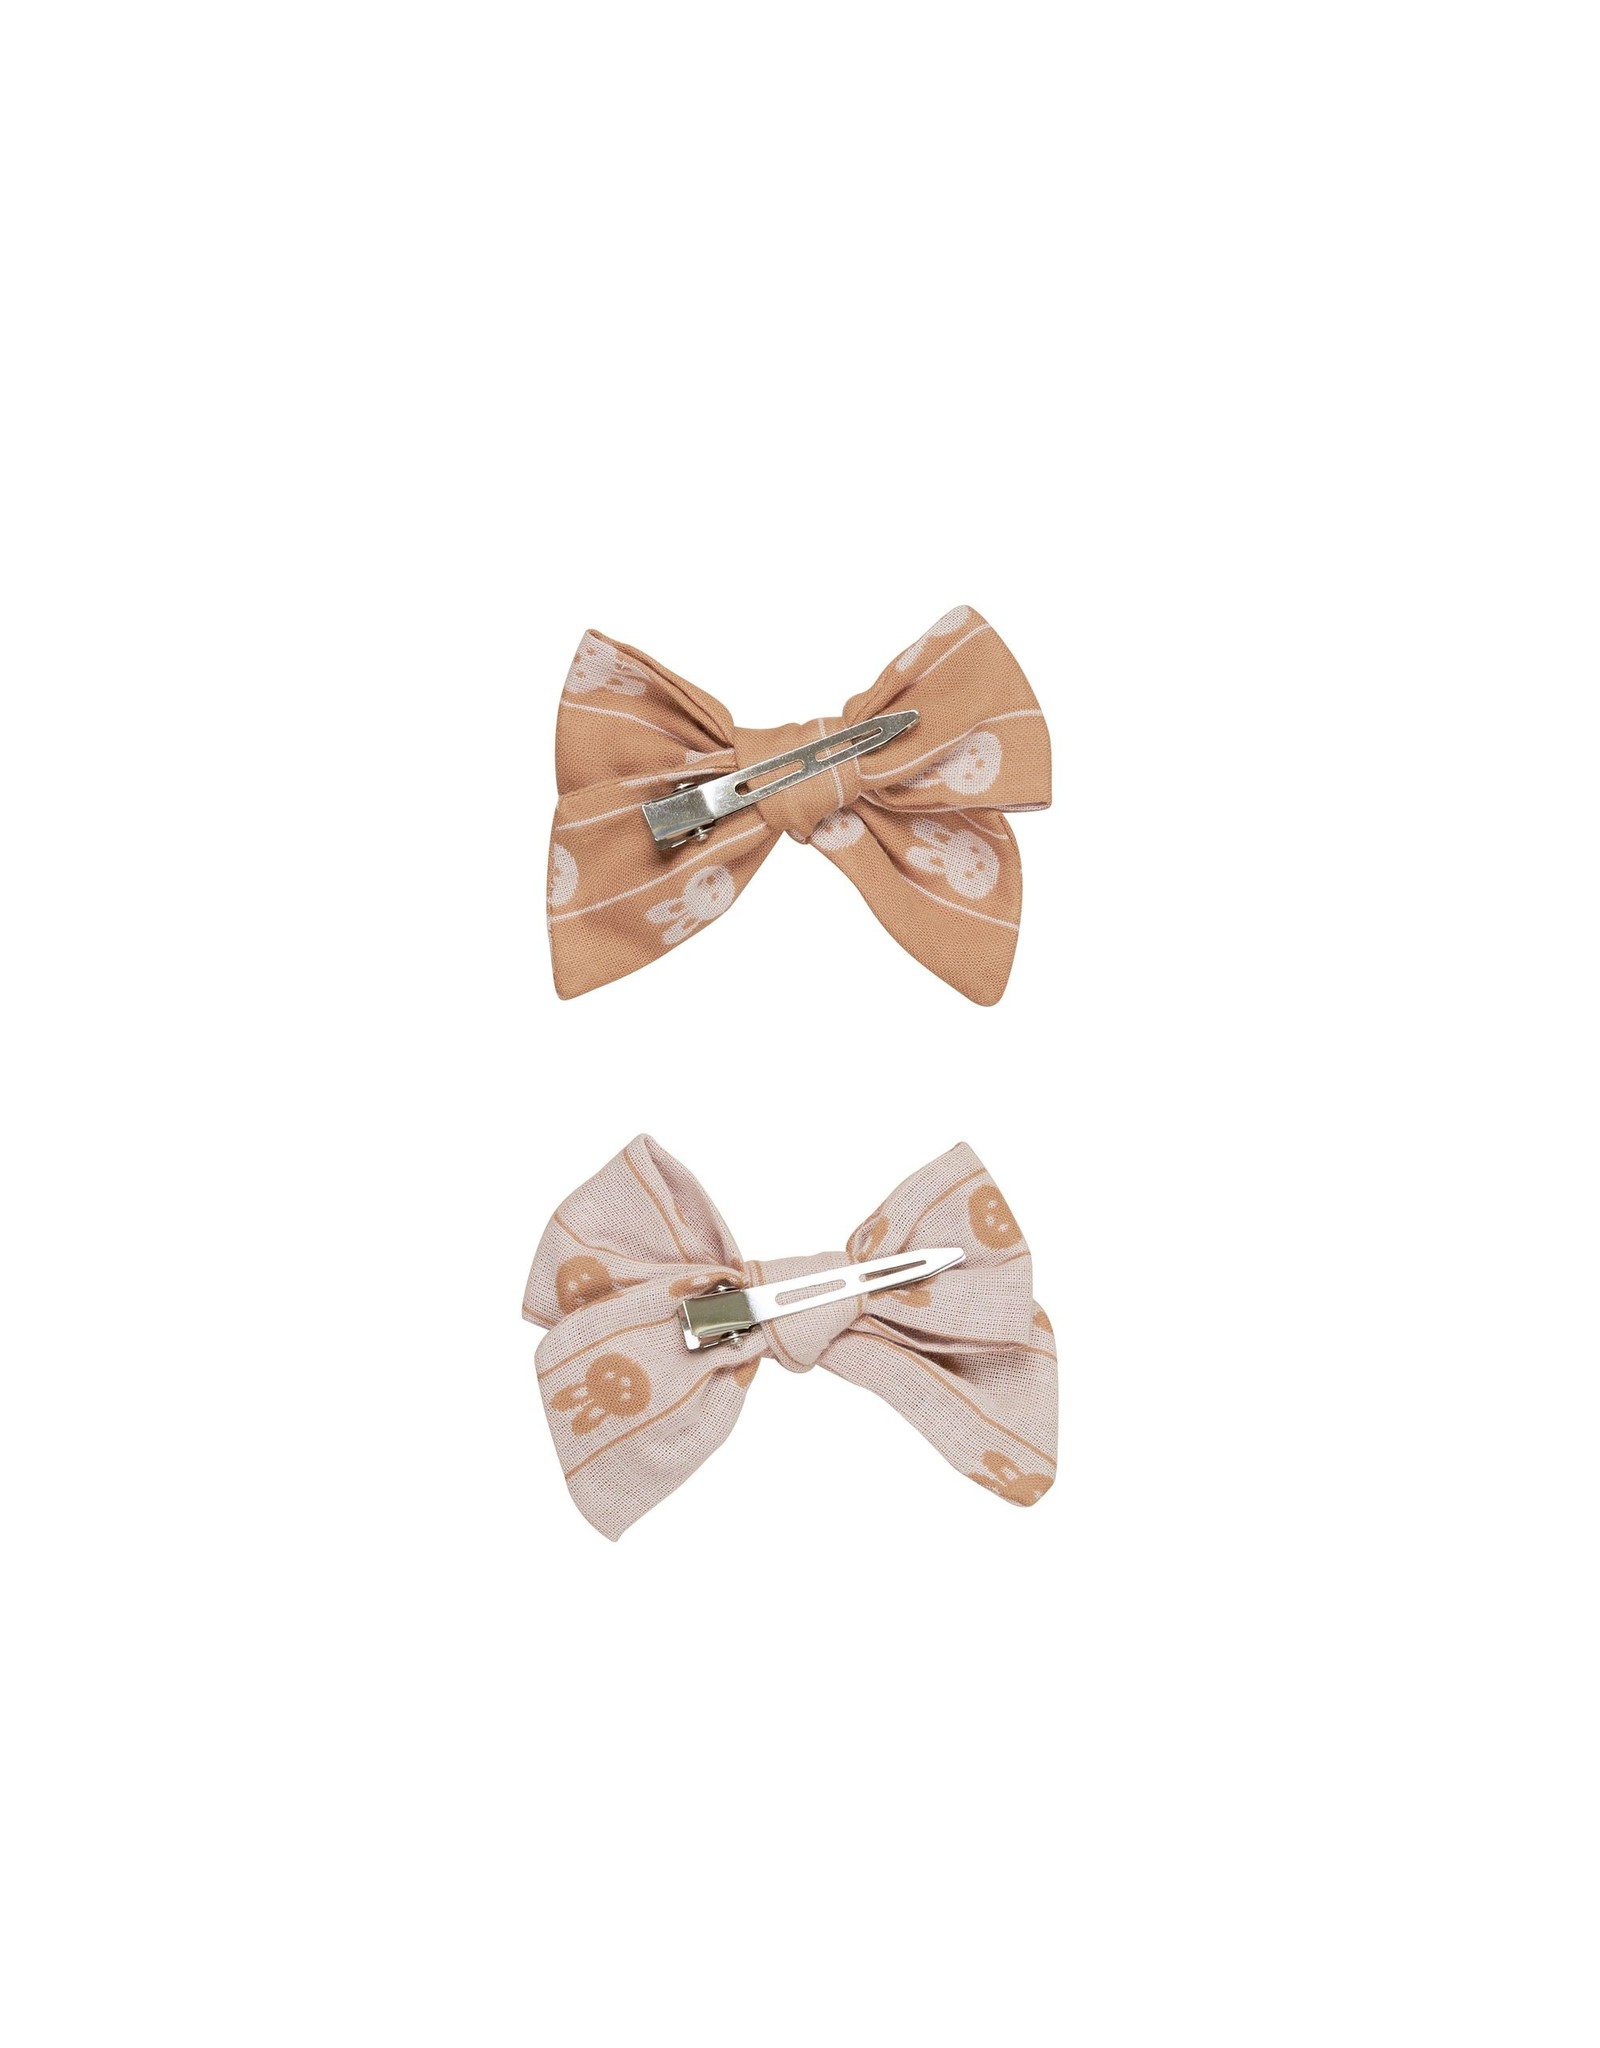 Huxbaby Huxbaby - Bunny Stripe 2pk Hair Bow Biscuit & Rose